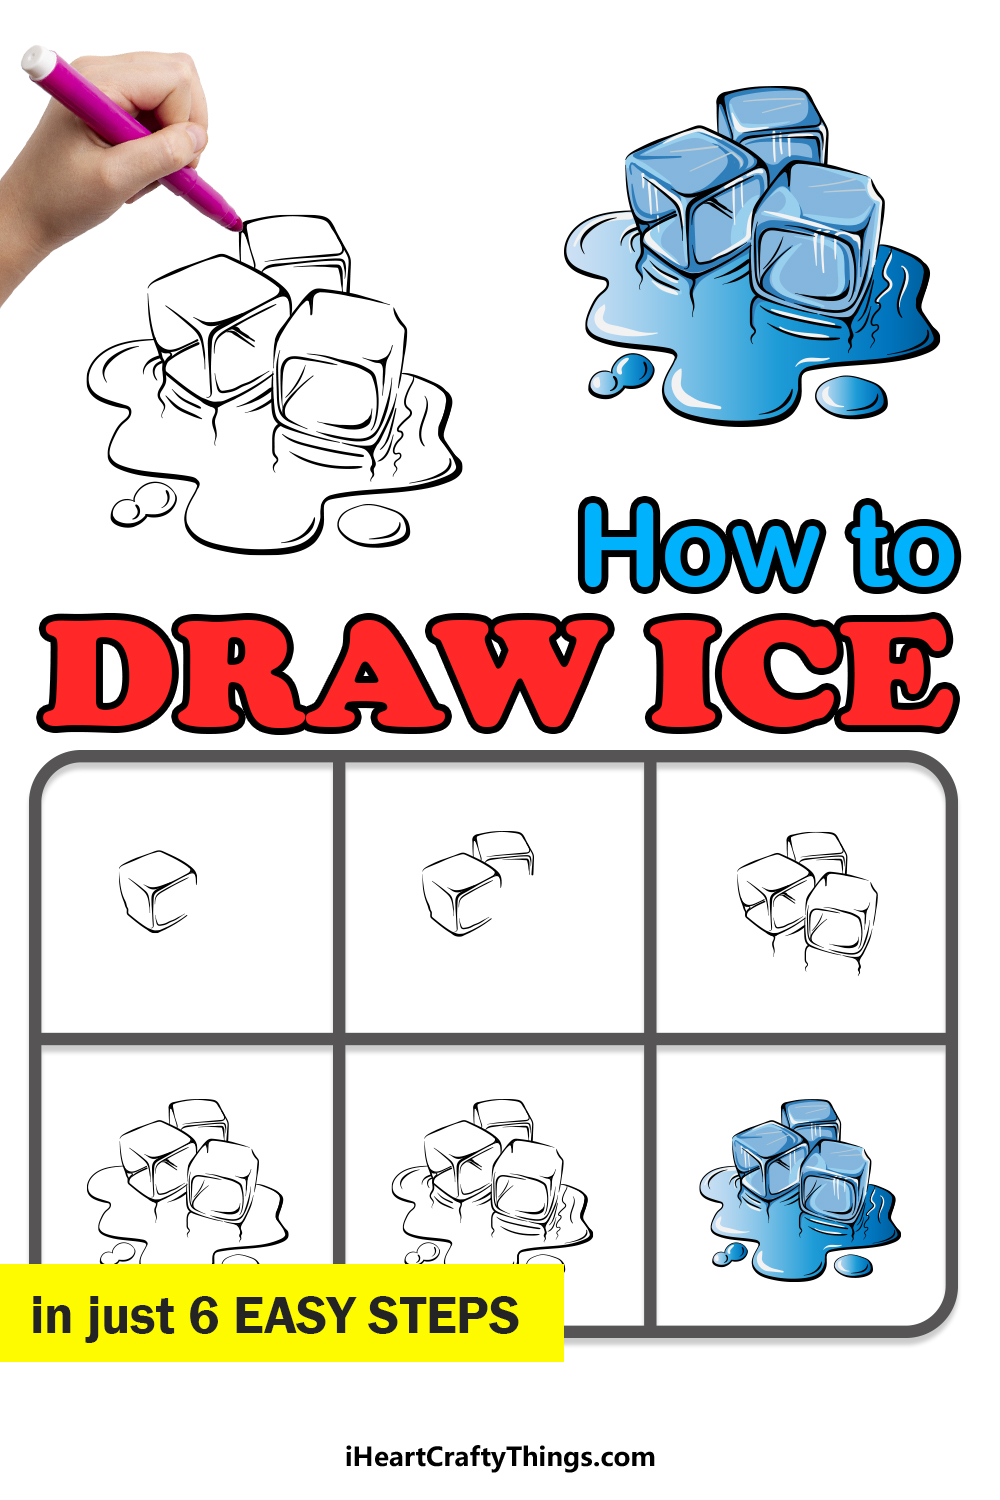 how to draw ice in 6 easy steps